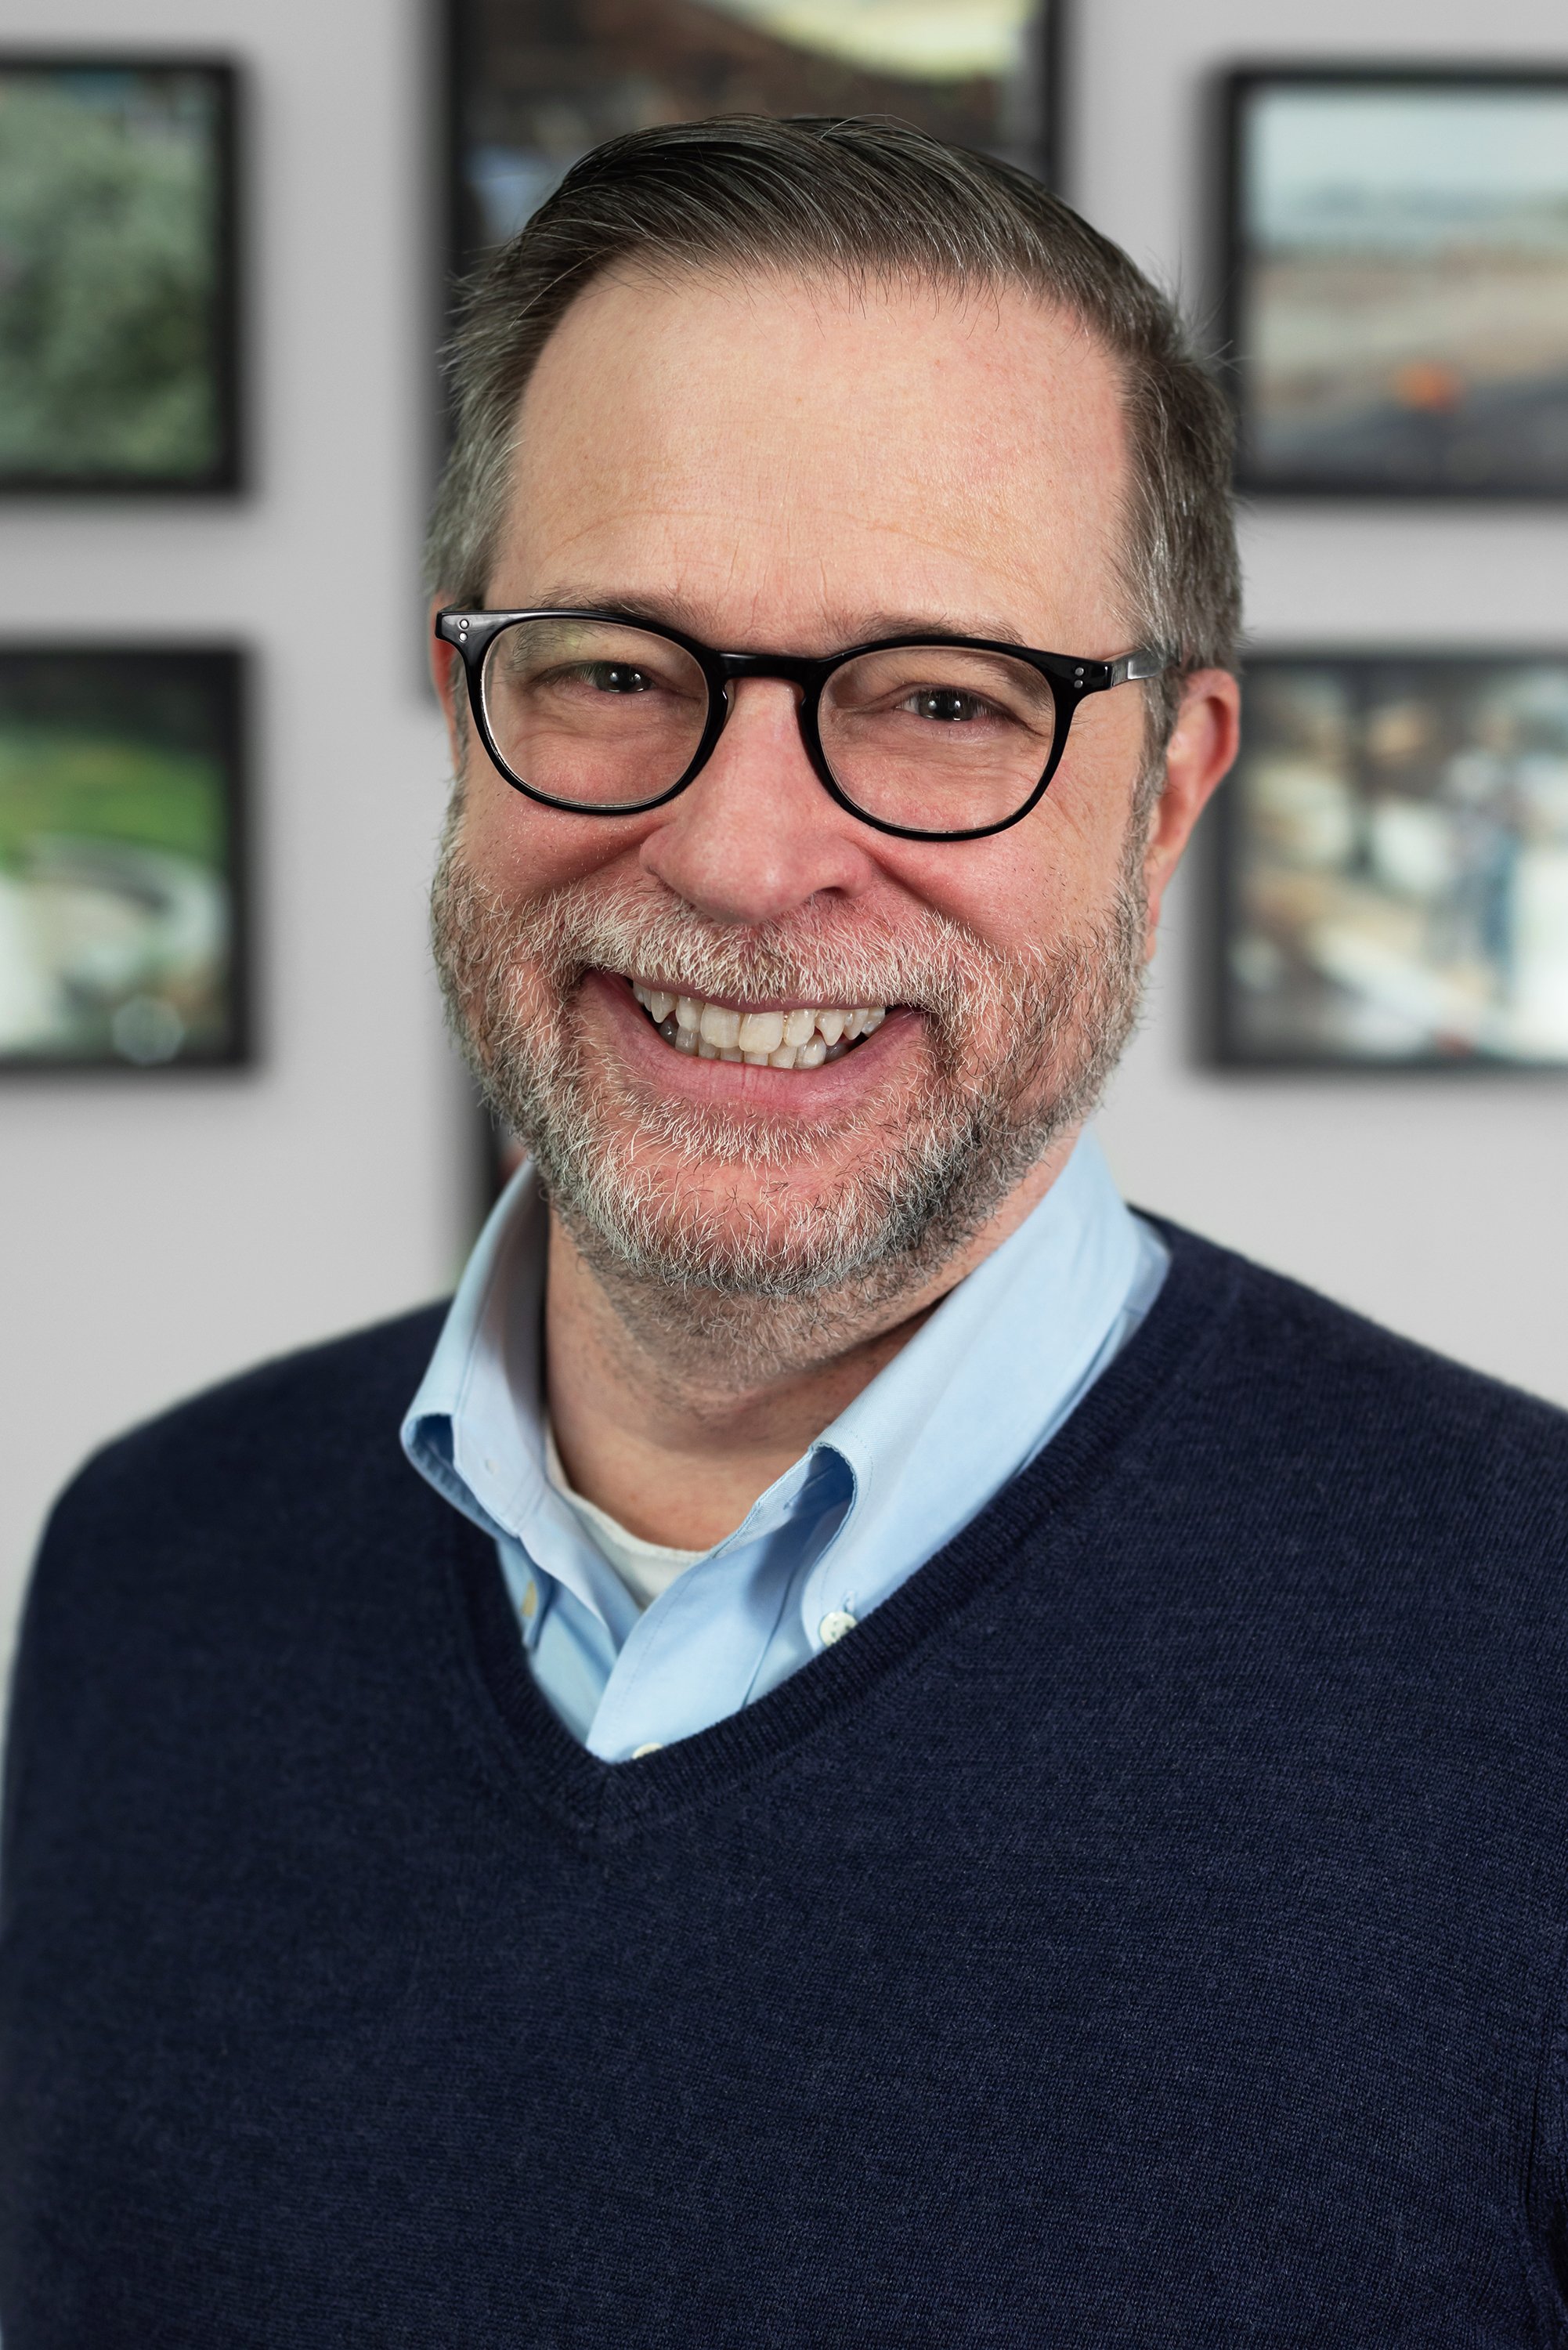  Corporate headshot of man in a blue sweater and glasses by Ari Scott, NYC headshot photographer. 